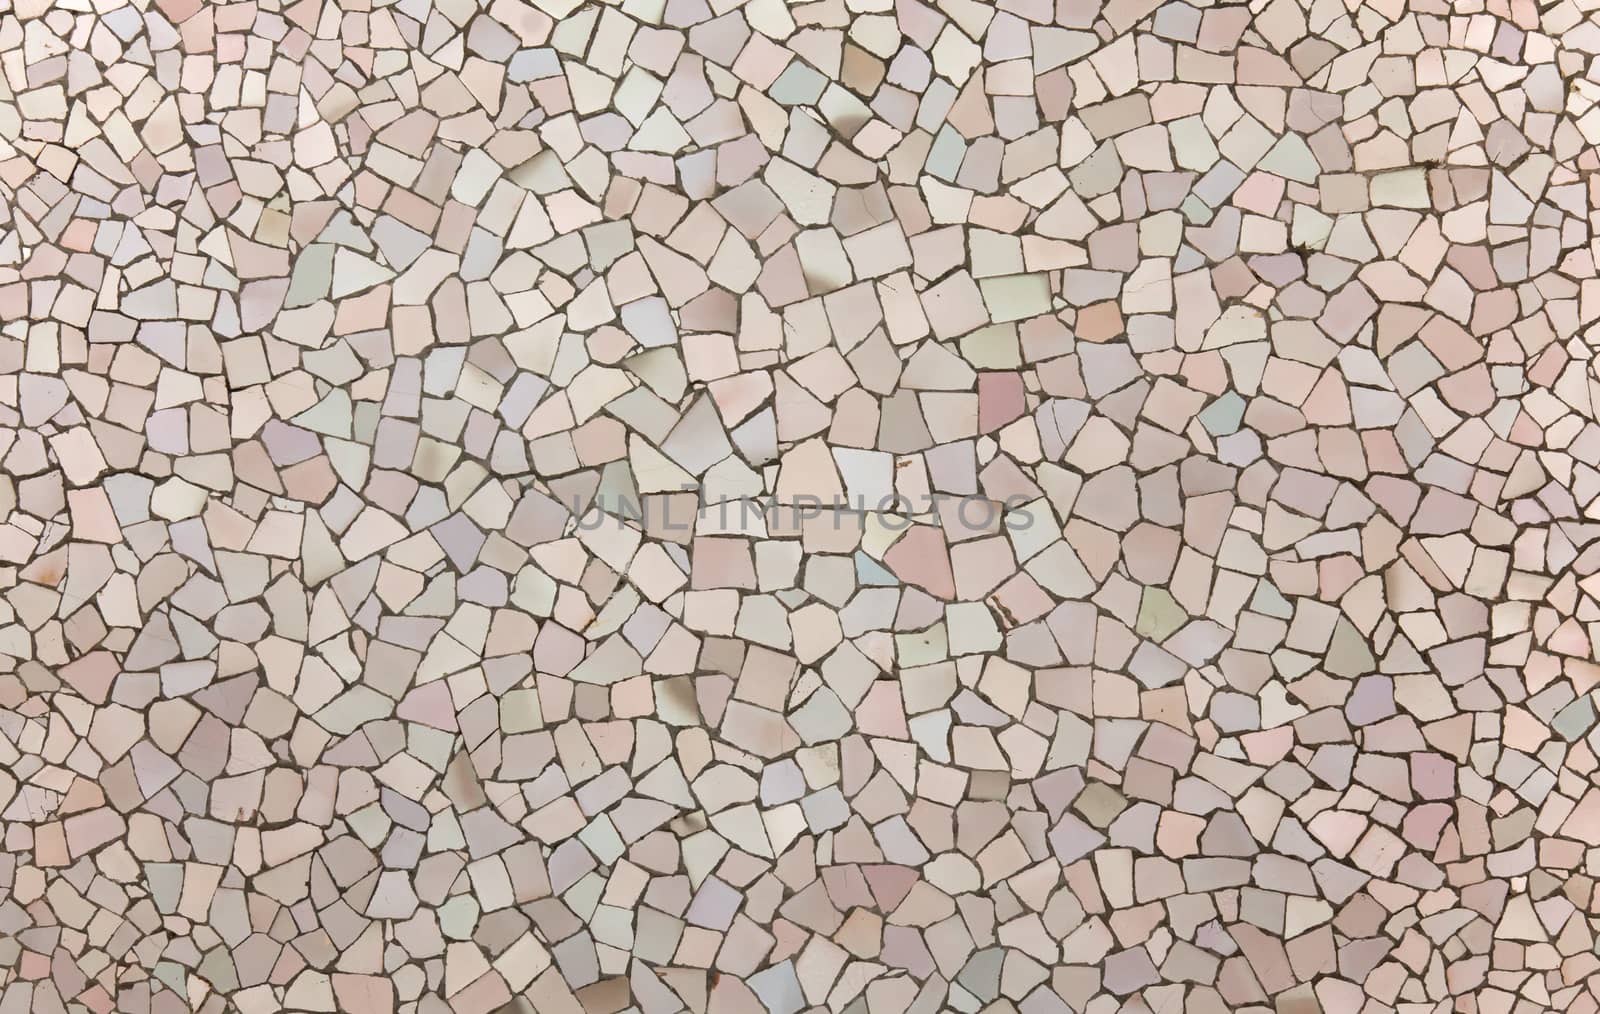 Old ceramic tiles in Park Guell - Barcelona, Spain by Portokalis